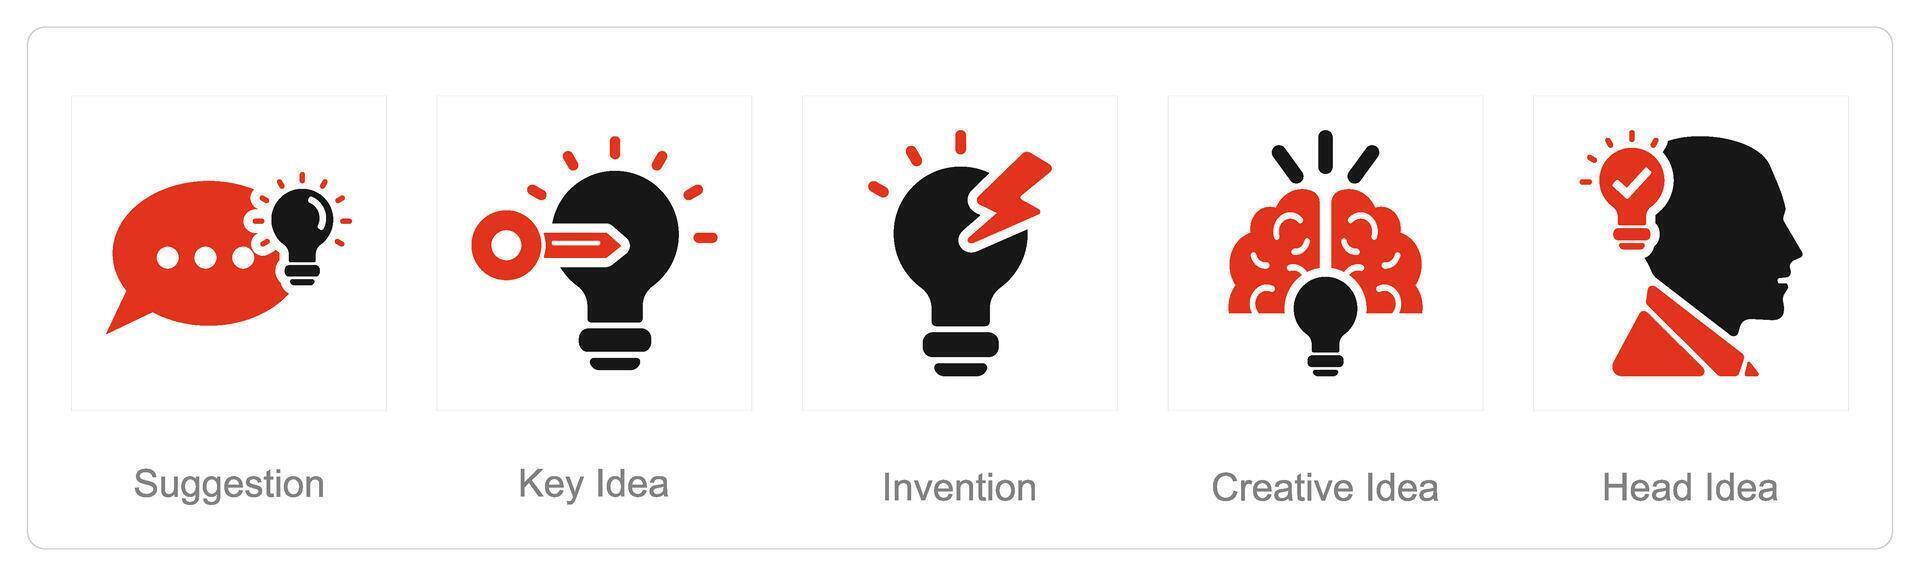 A set of 5 Idea icons as suggestion, key idea, invention vector